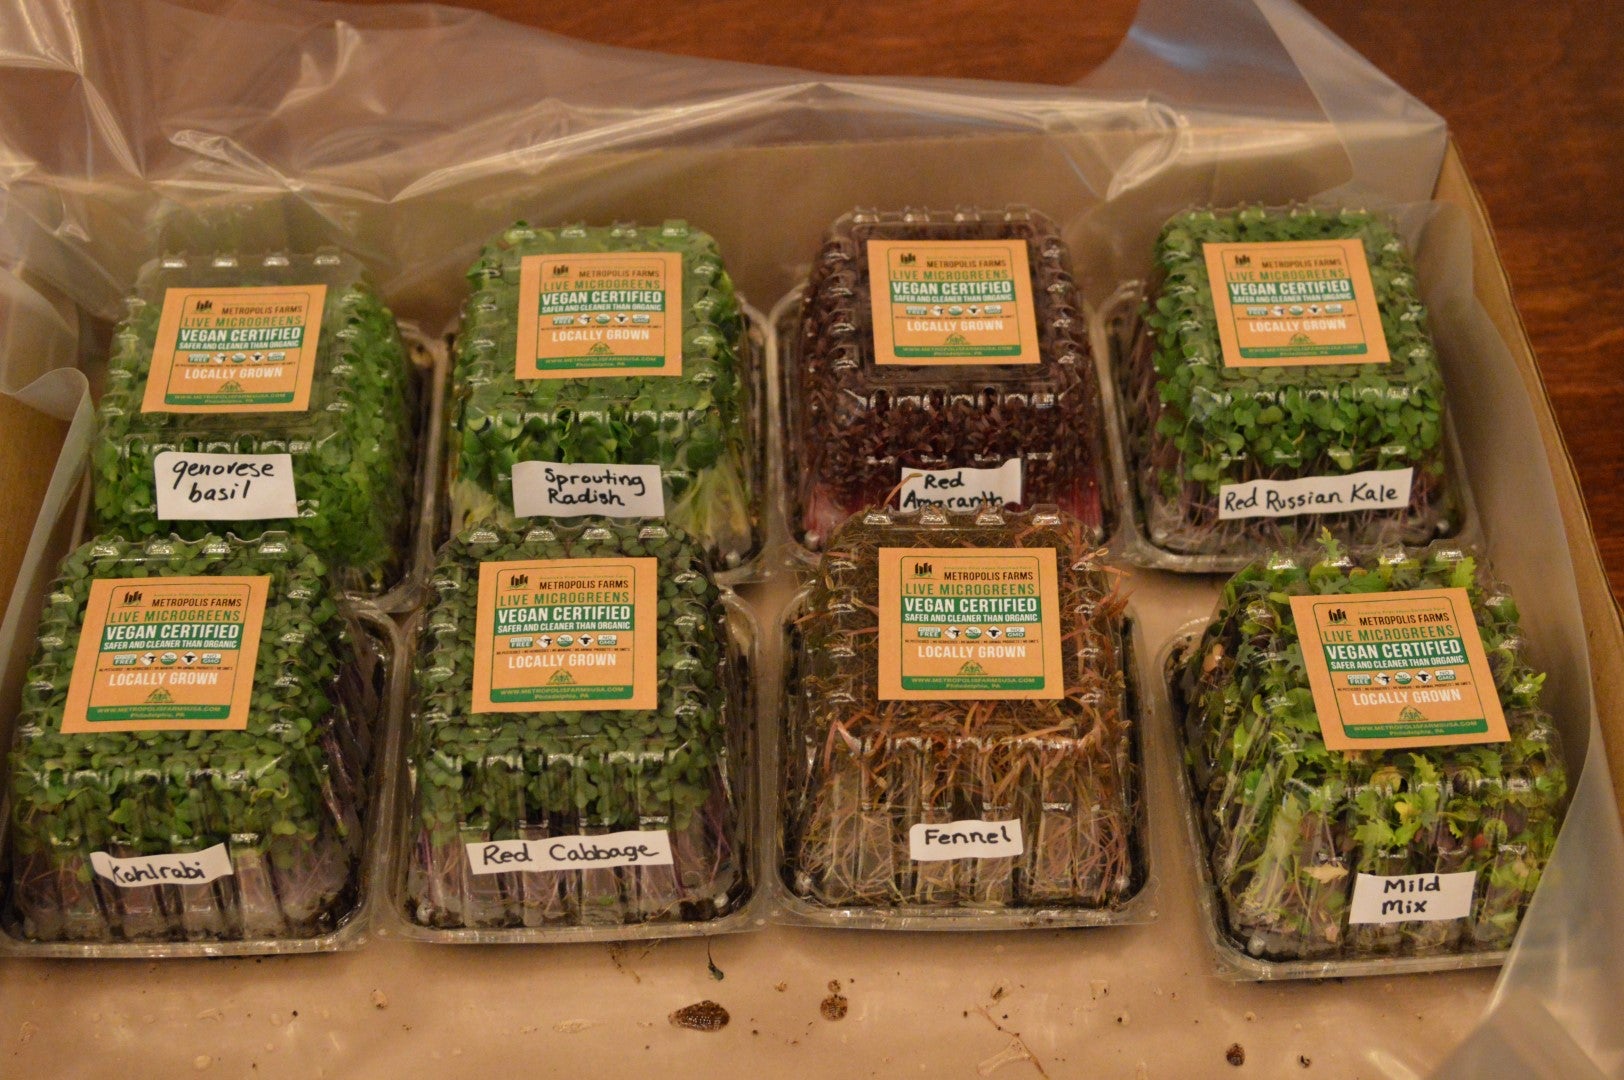 Some of the greens grown in Philadelphia. (Tom MacDonald/WHYY)